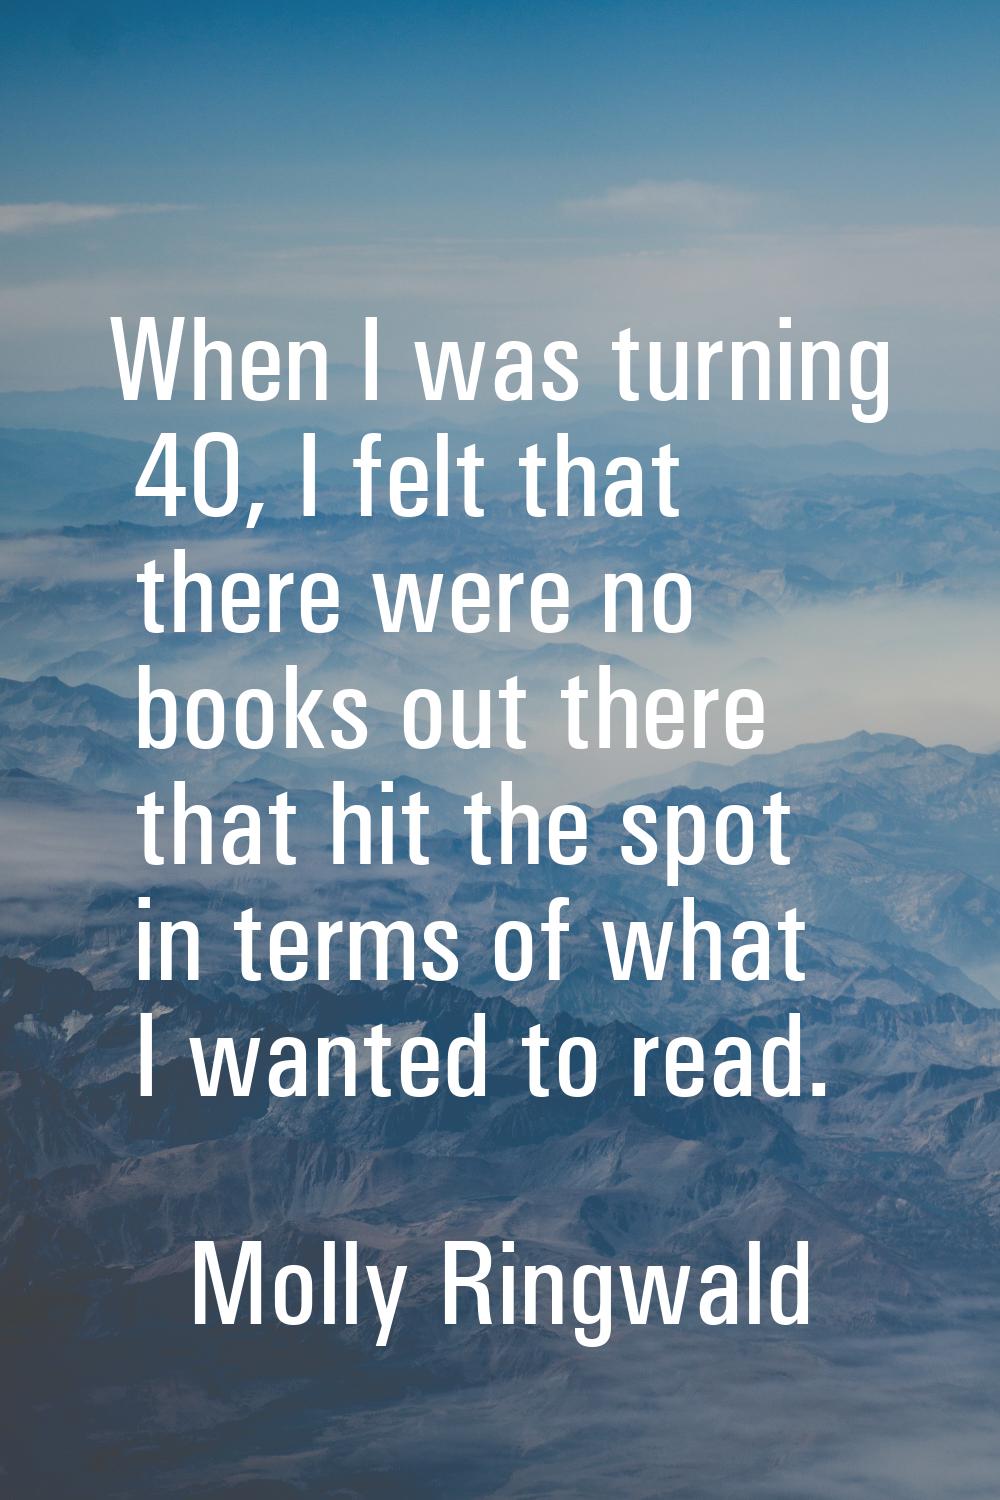 When I was turning 40, I felt that there were no books out there that hit the spot in terms of what